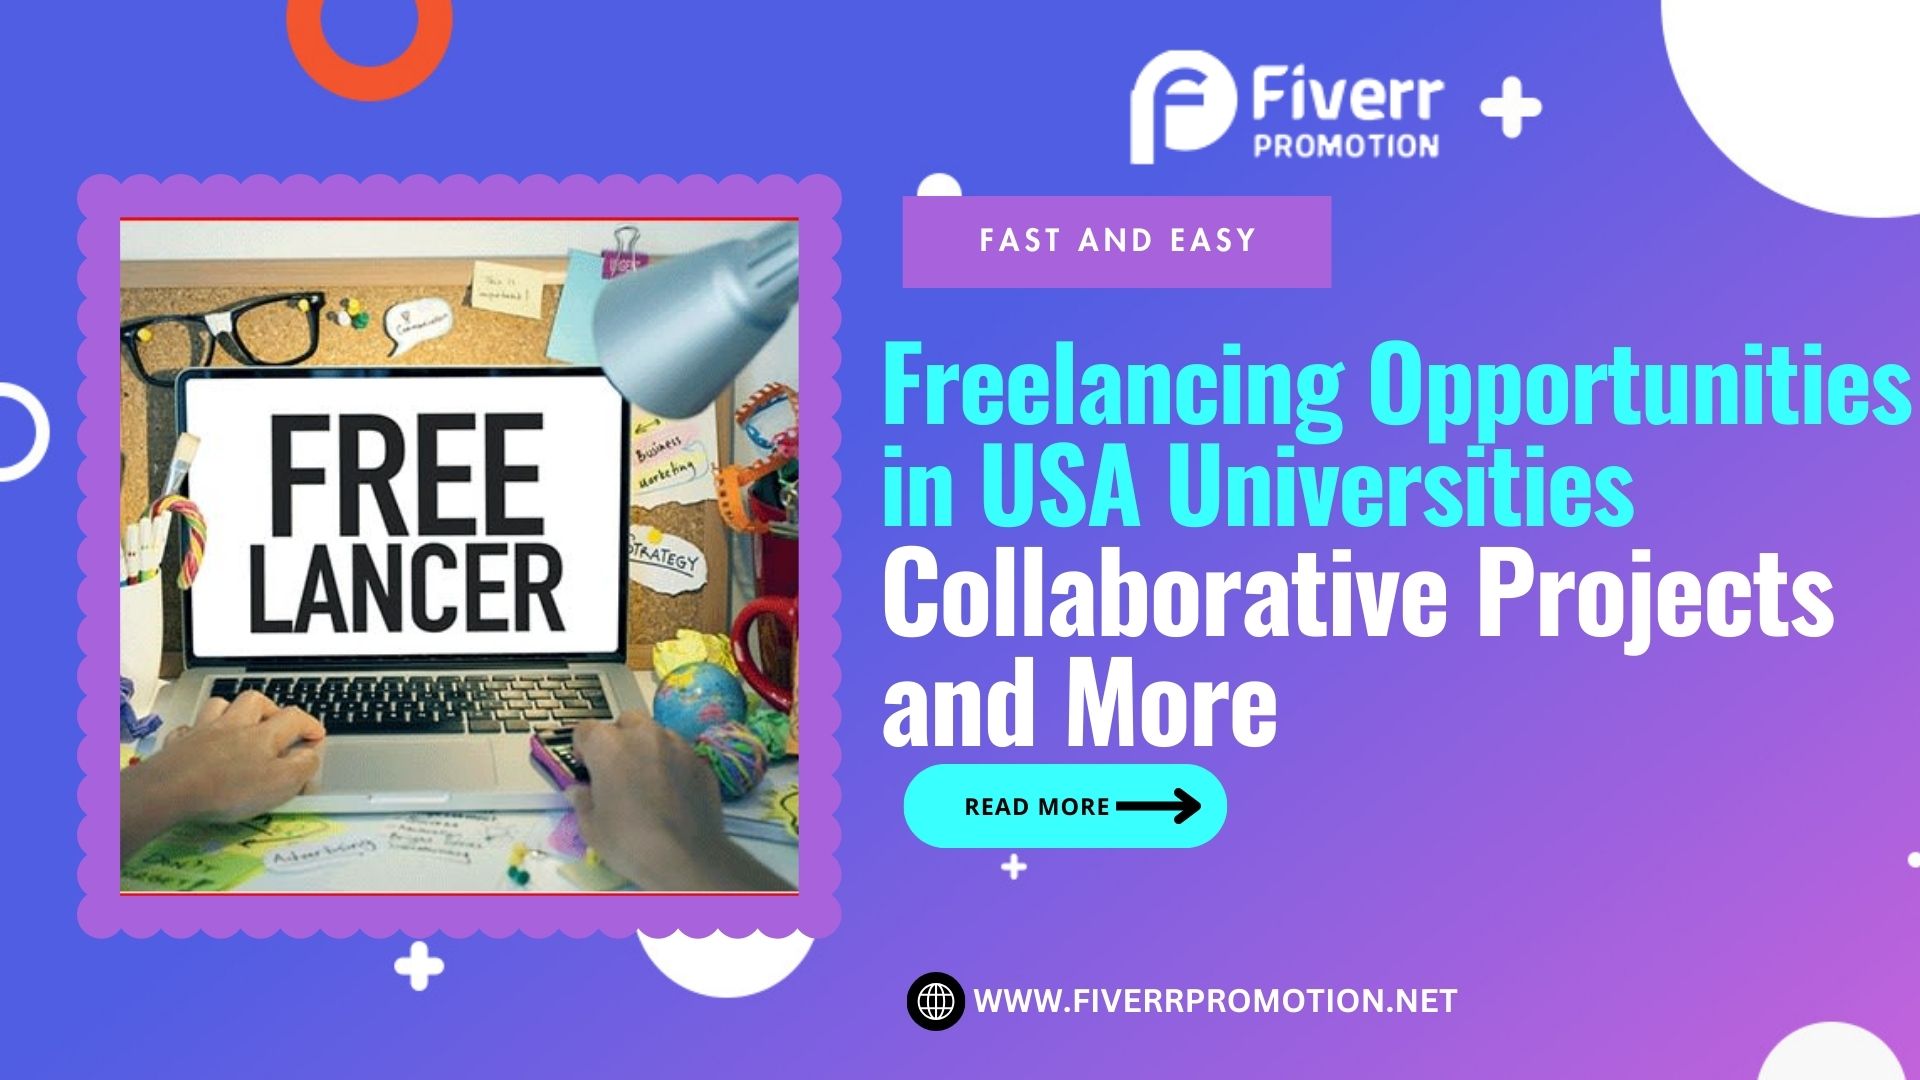 Fast and Easy Freelancing Opportunities in USA Universities: Collaborative Projects and More